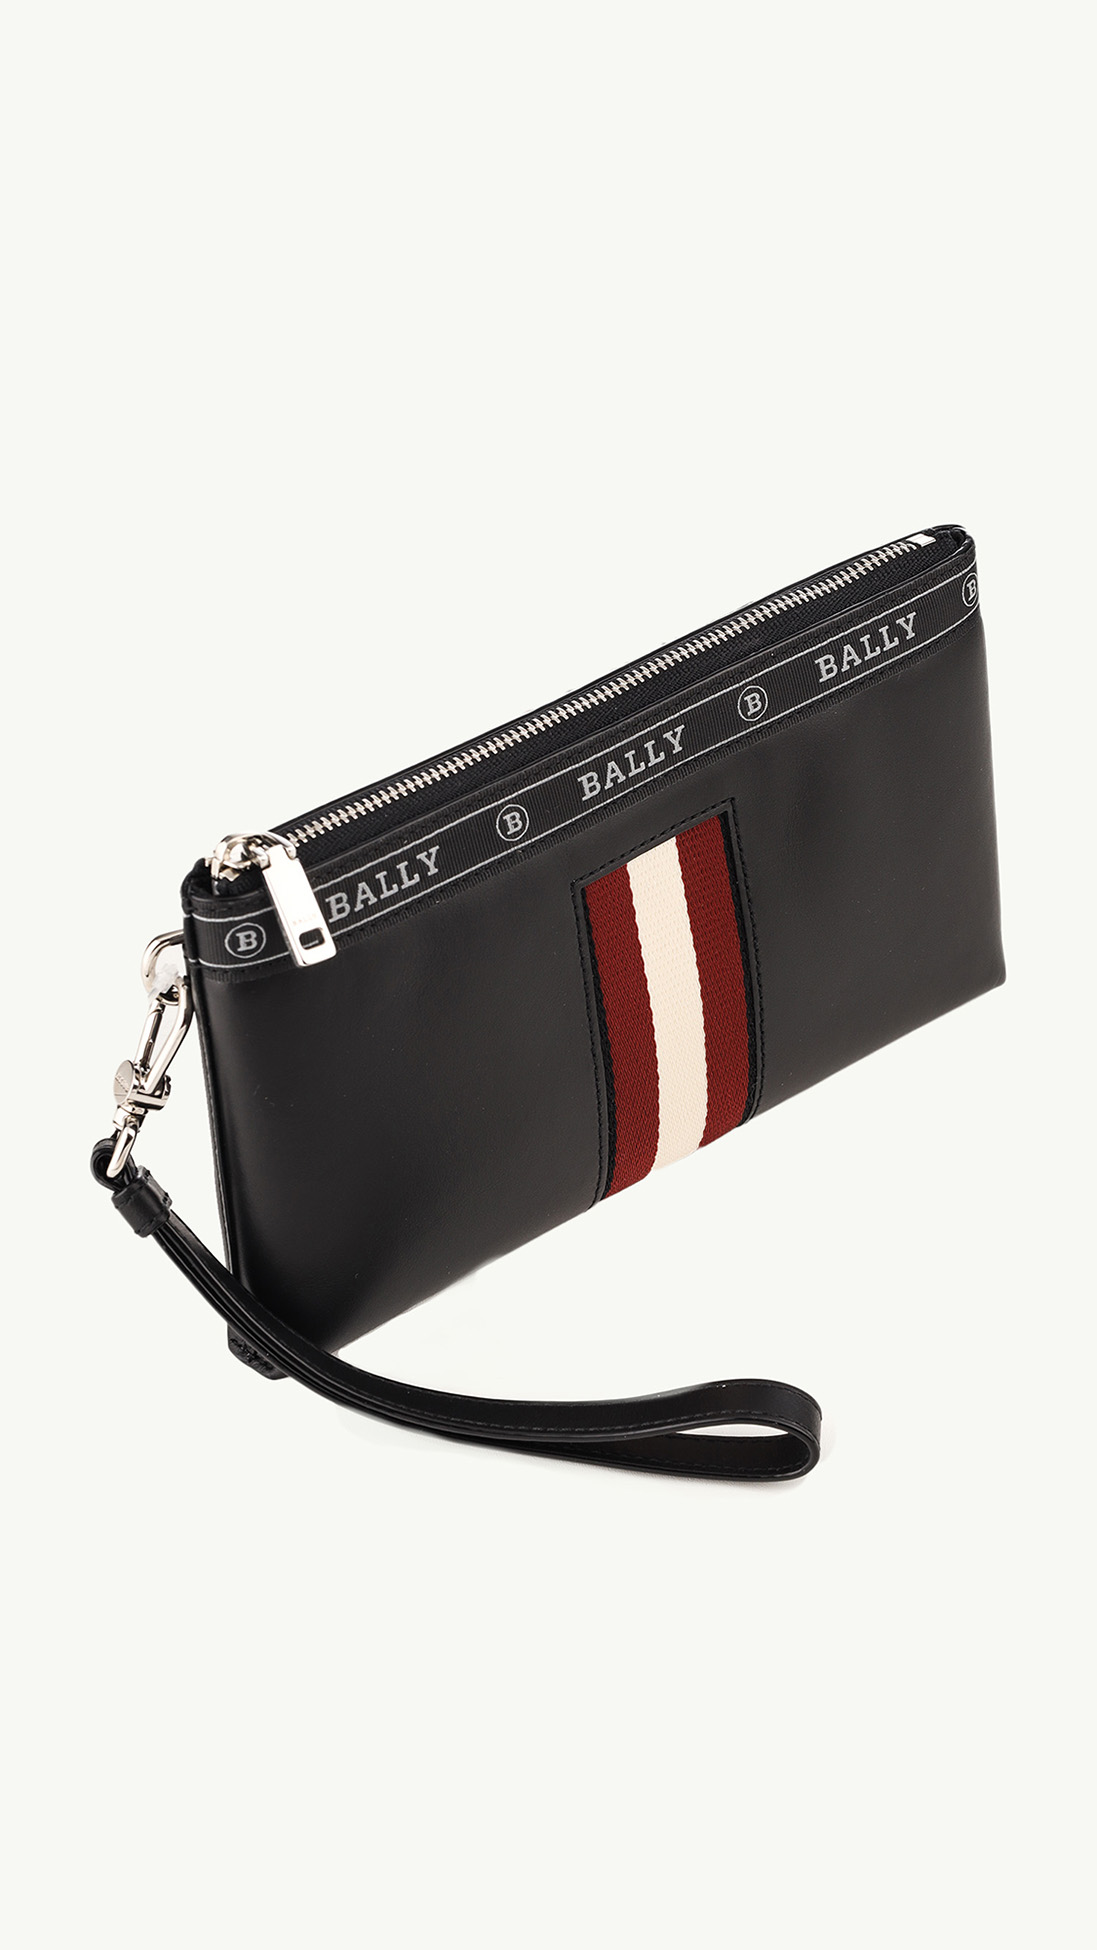 BALLY Beryer Phone Wallet in Black Bovine Leather with Red/White Stripe 2